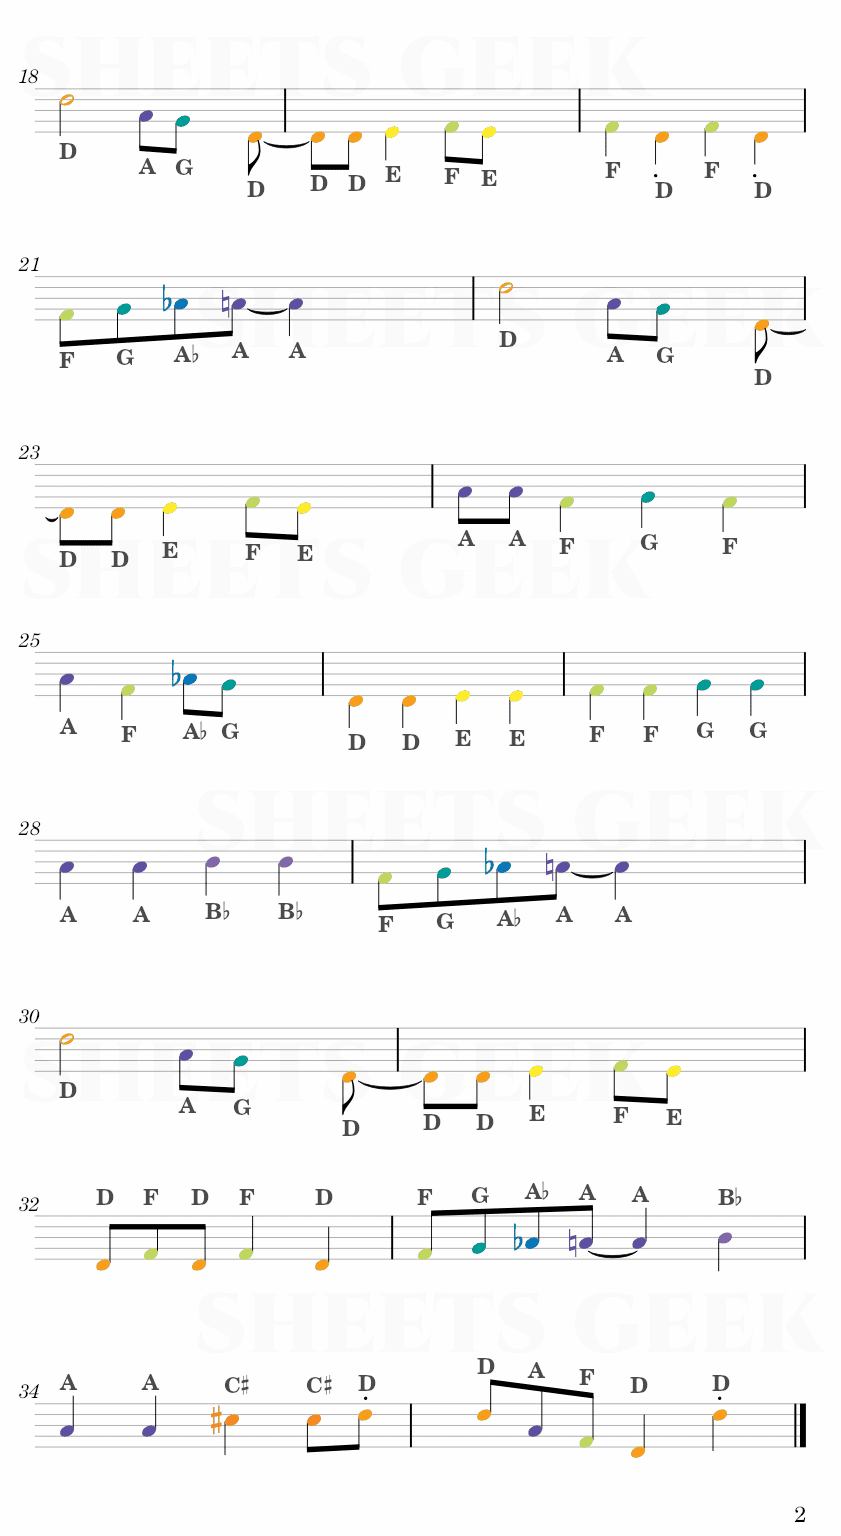 The Fairly Oddparents - Theme Song Easy Sheet Music Free for piano, keyboard, flute, violin, sax, cello page 2